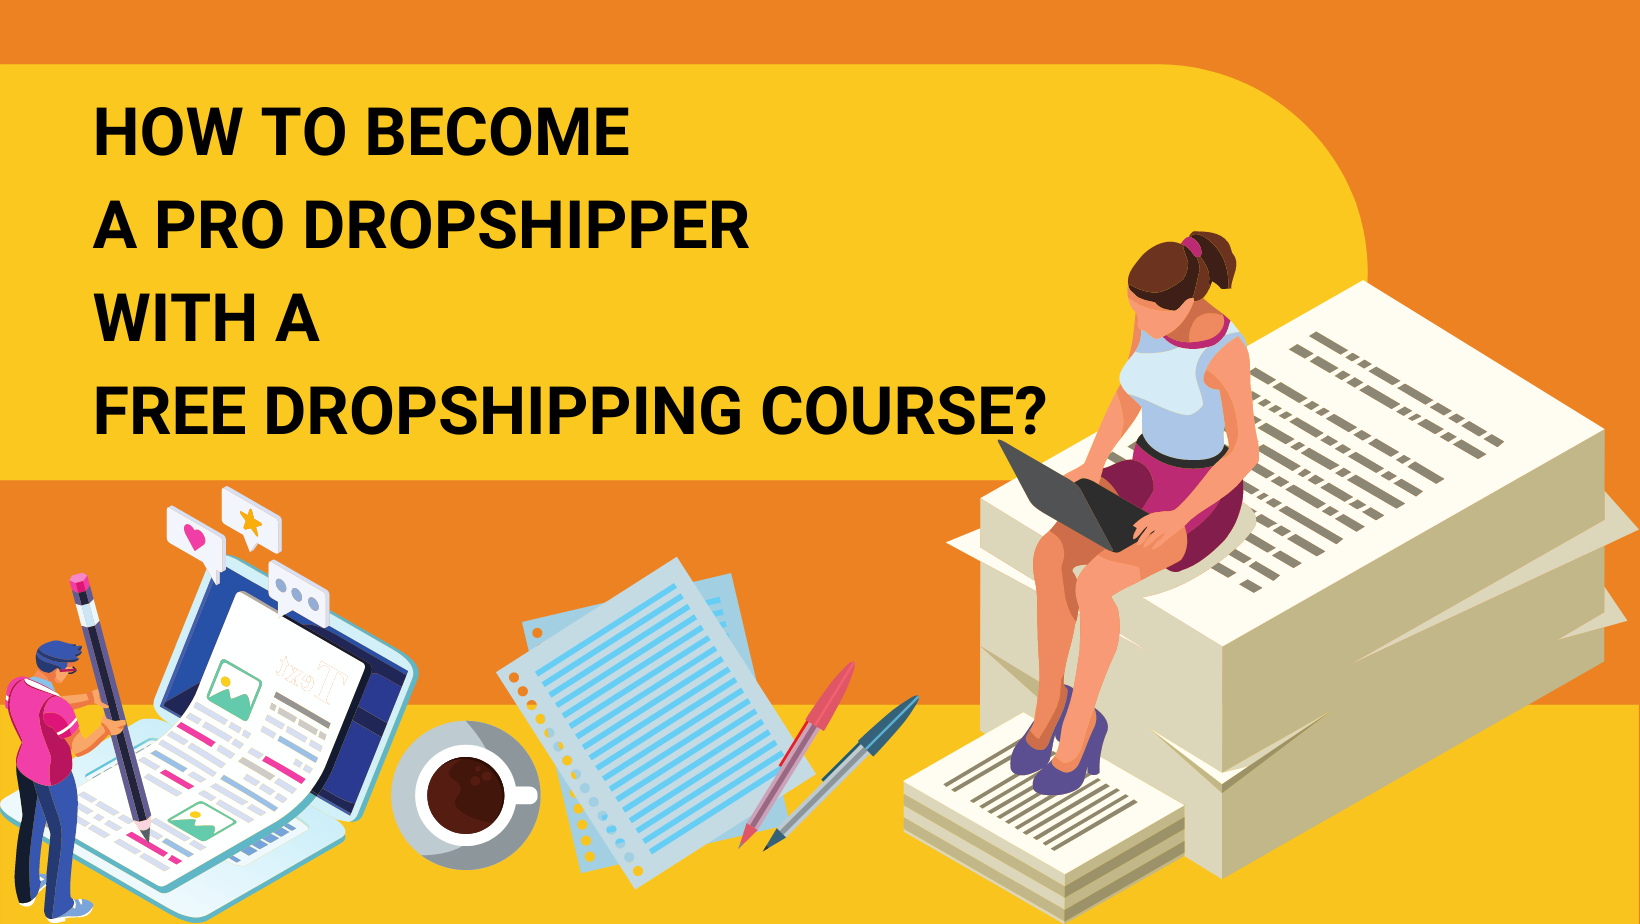 HOW TO BECOME A PRO DROPSHIPPER WITH A FREE DROPSHIPPING COURSE